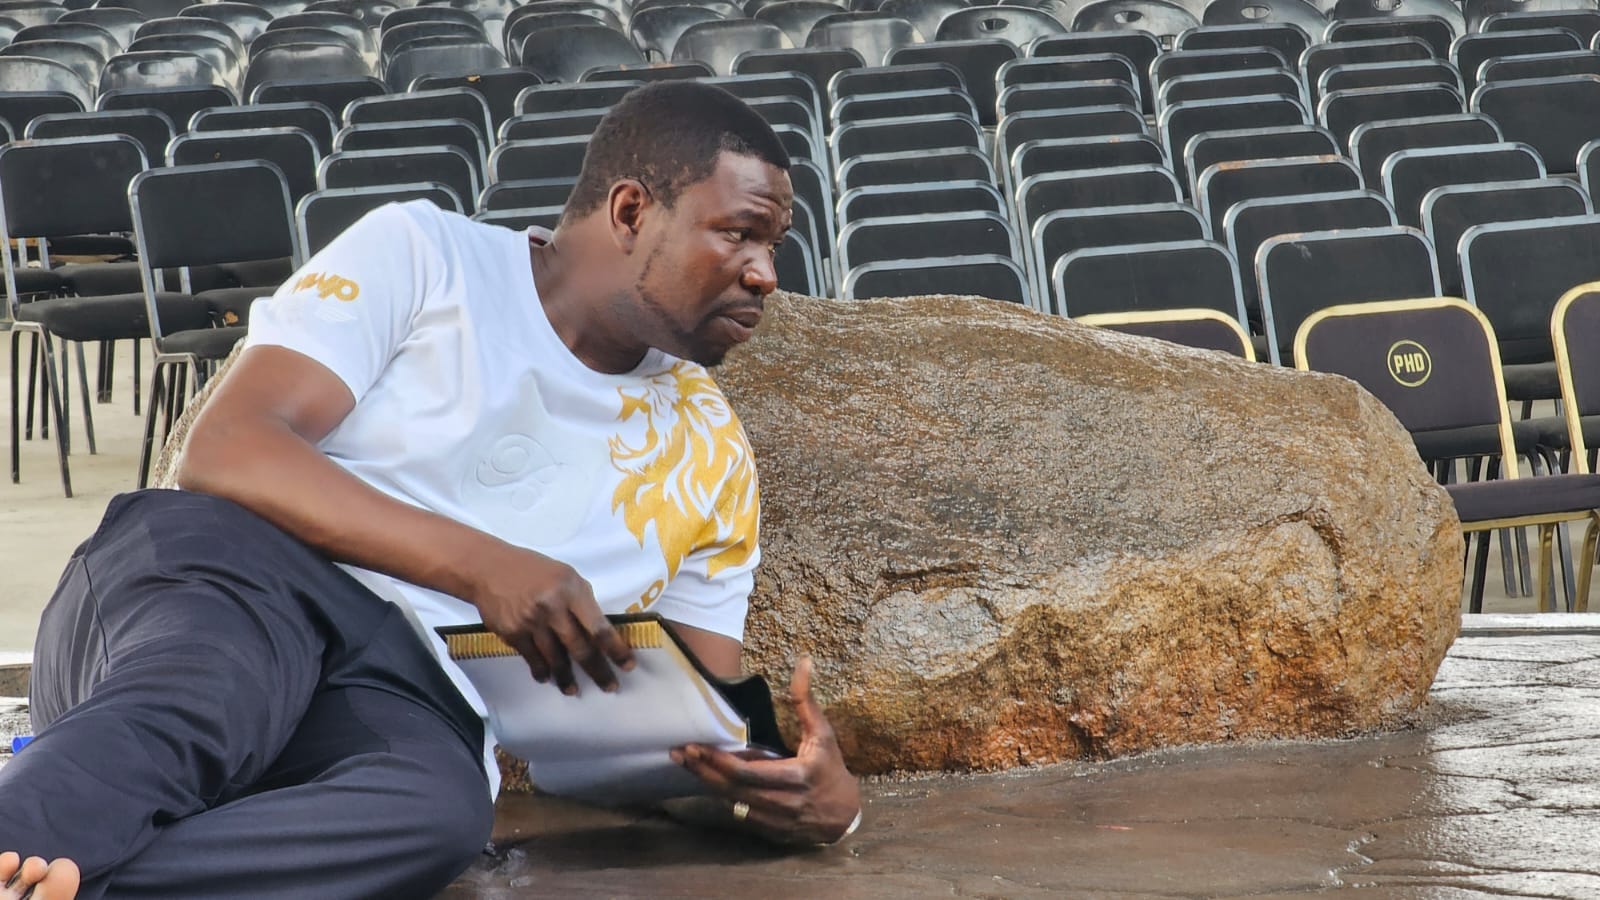 From Travelling With A Satchel Full Of Prayers To This! Magaya Back With A Rock!